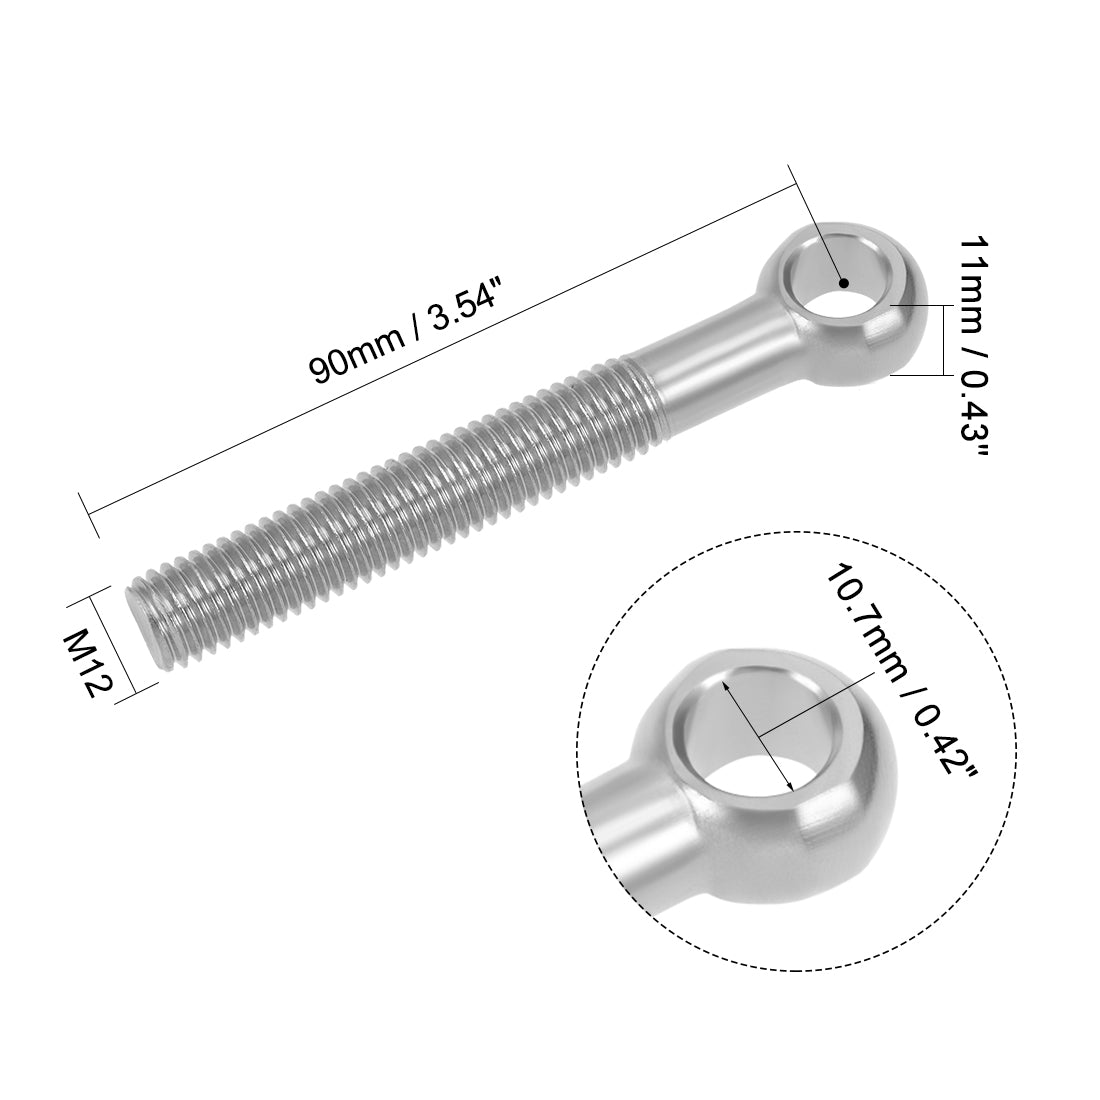 uxcell Uxcell M12 x 90mm Machinery Shoulder Swing Lifting Eye Bolt 304 Stainless Steel Metric Thread